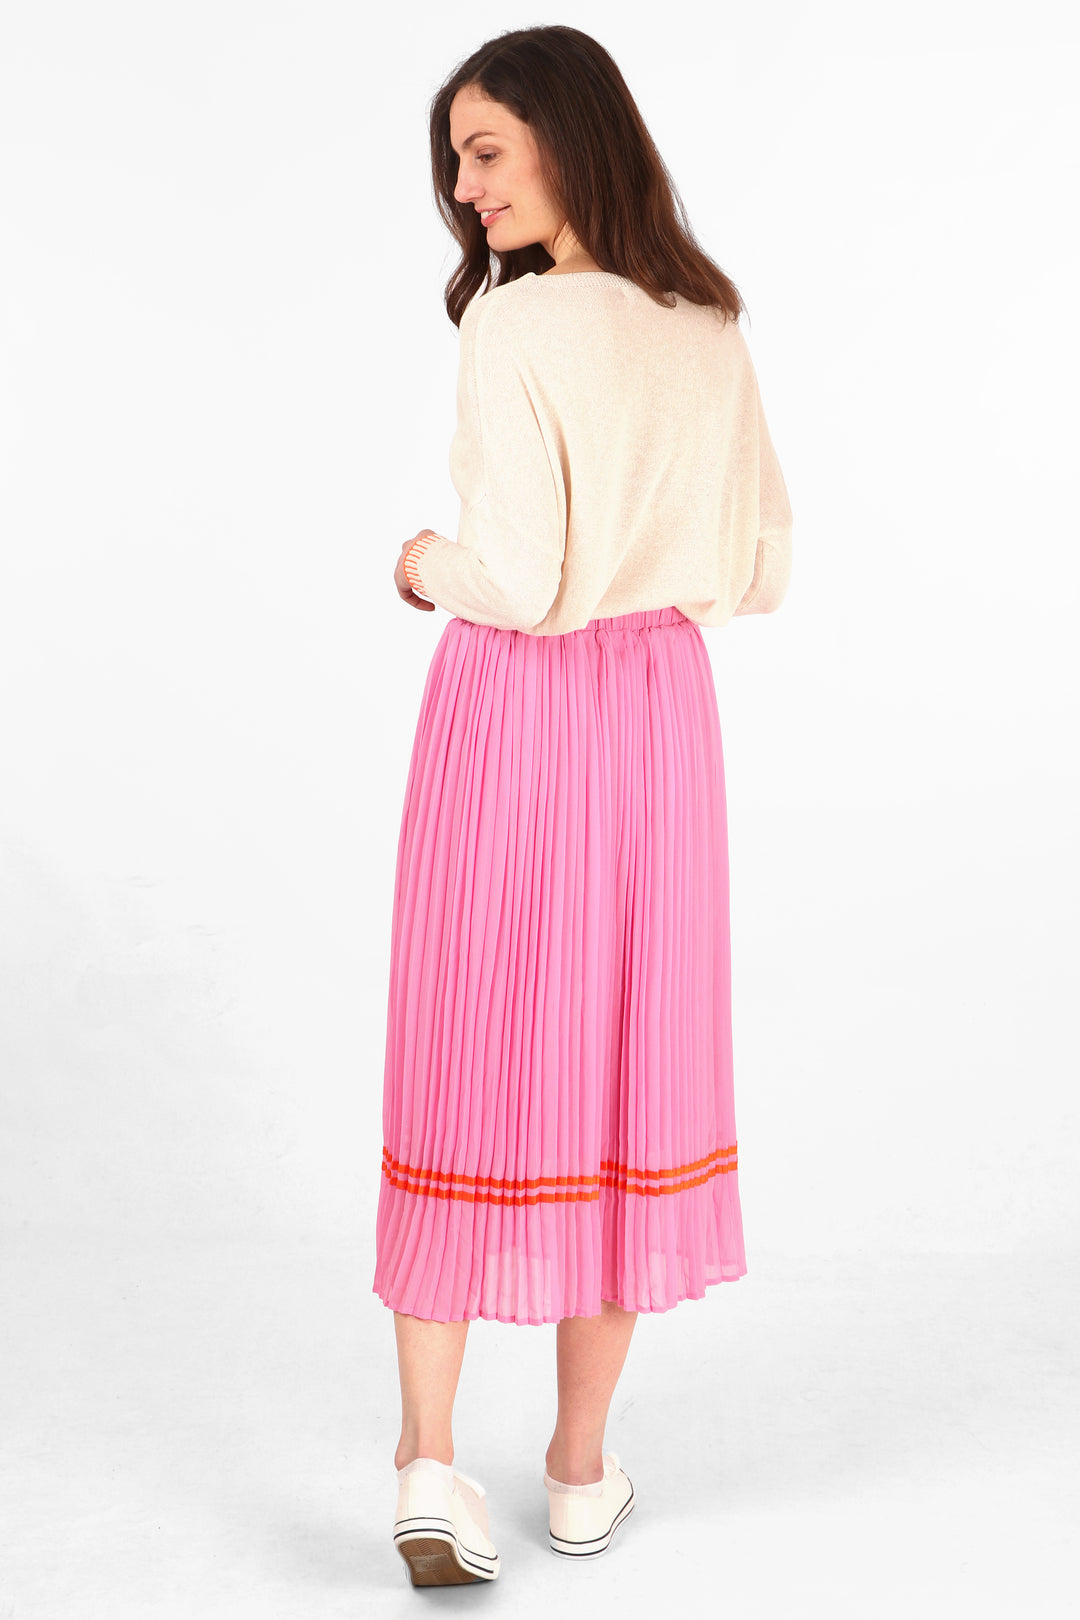 model showing the back of the pink pleated midi skirt showing an all around orange ribbon trim